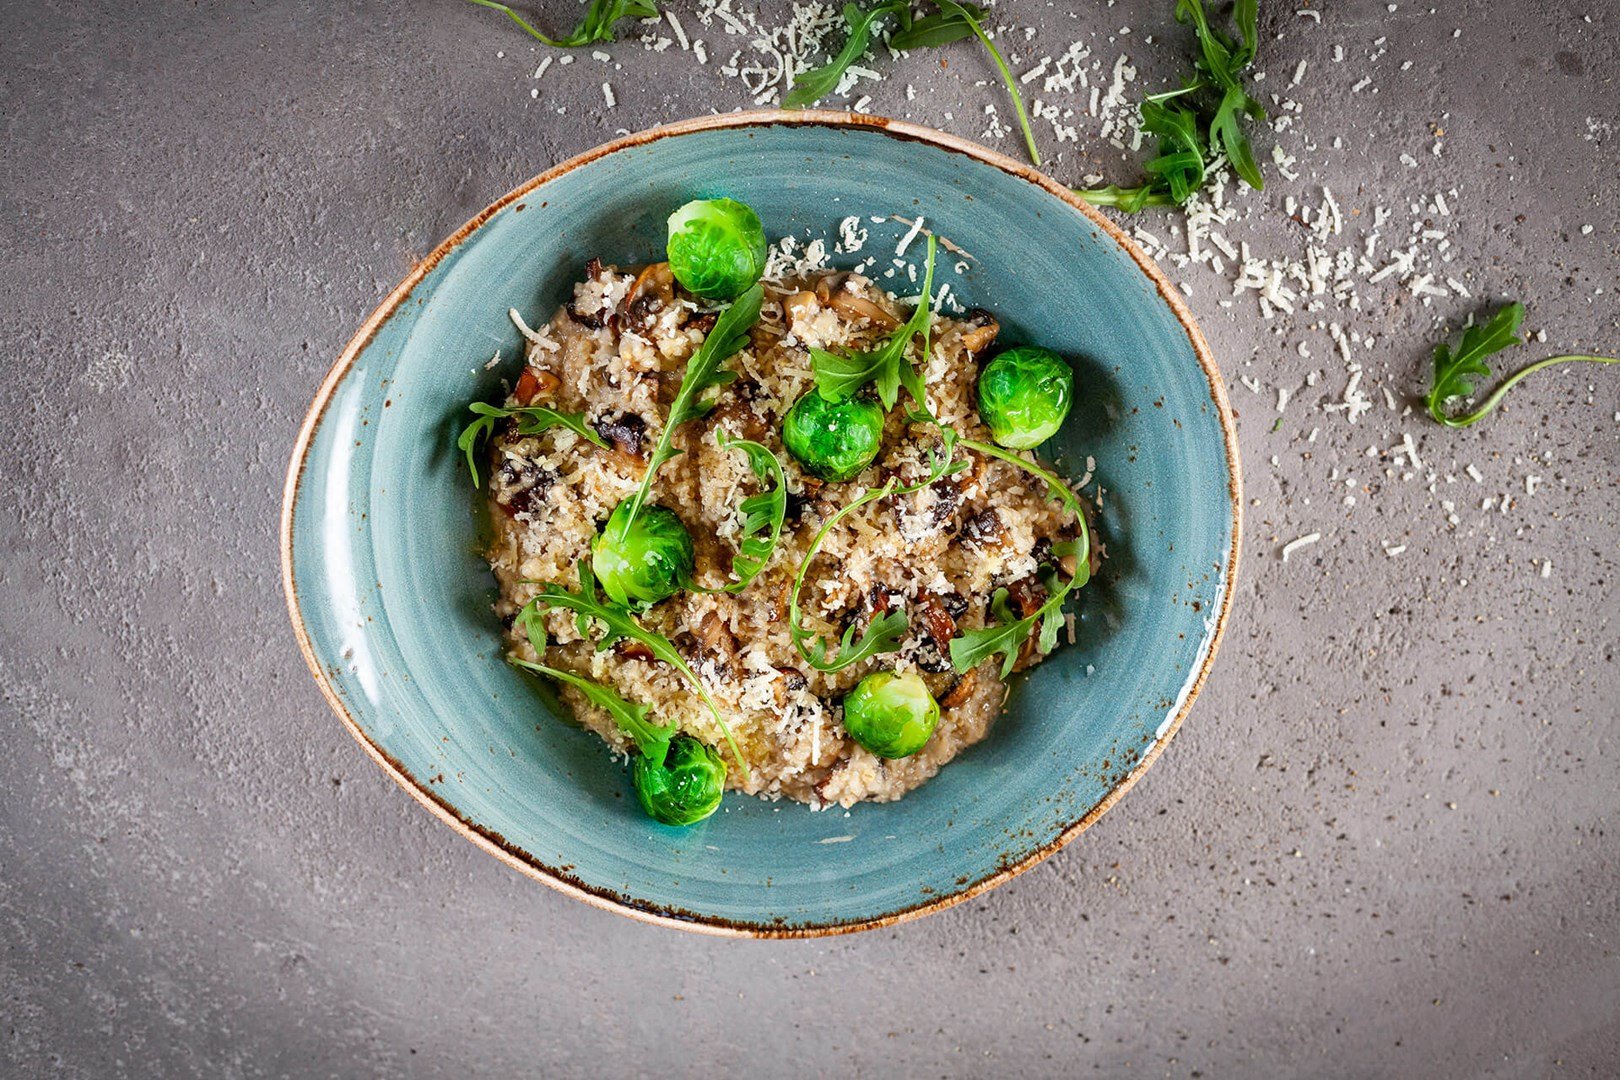 Dish with pearl barley risotto with mushrooms and brussels sprouts